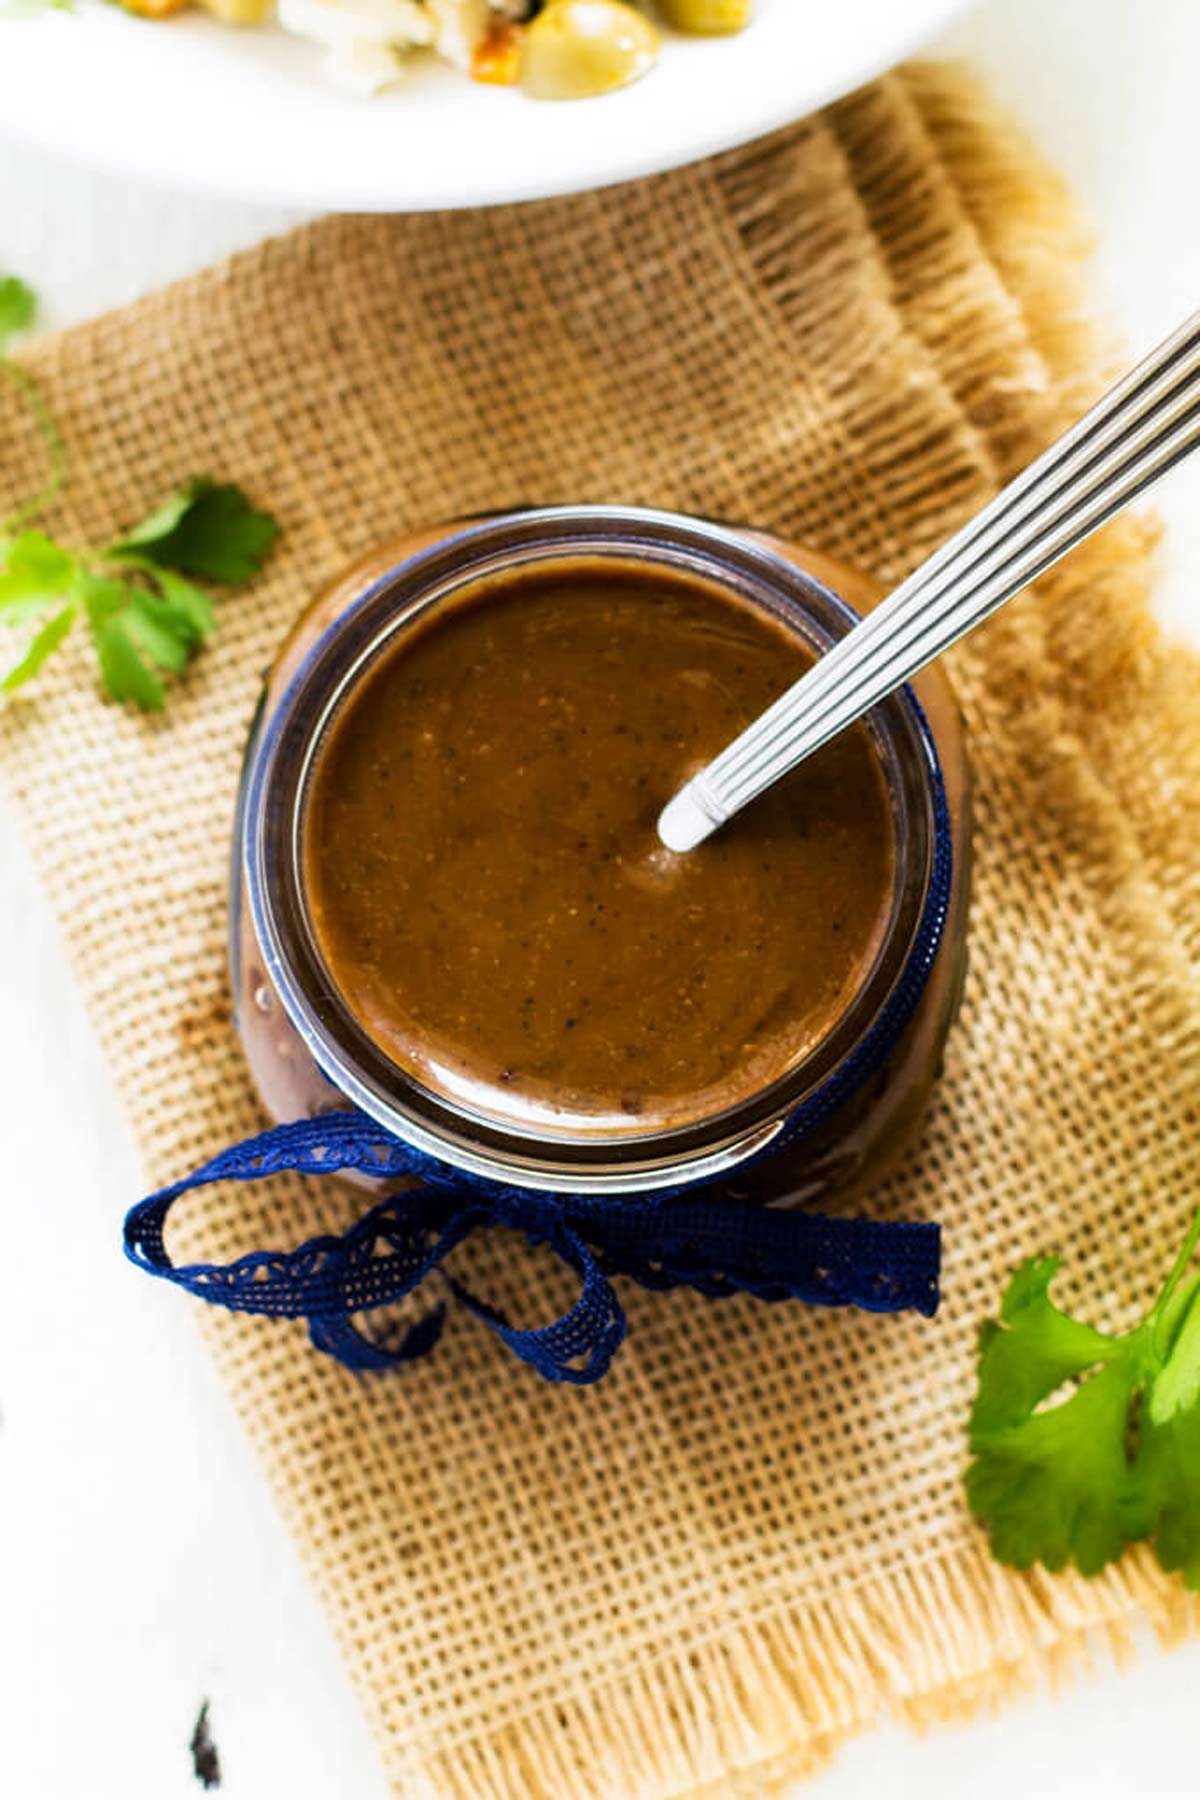 Photo of a Balsamic Vinaigrette Dressing Recipe in a glass jar with a blue ribbon sitting on a rustic fabric.